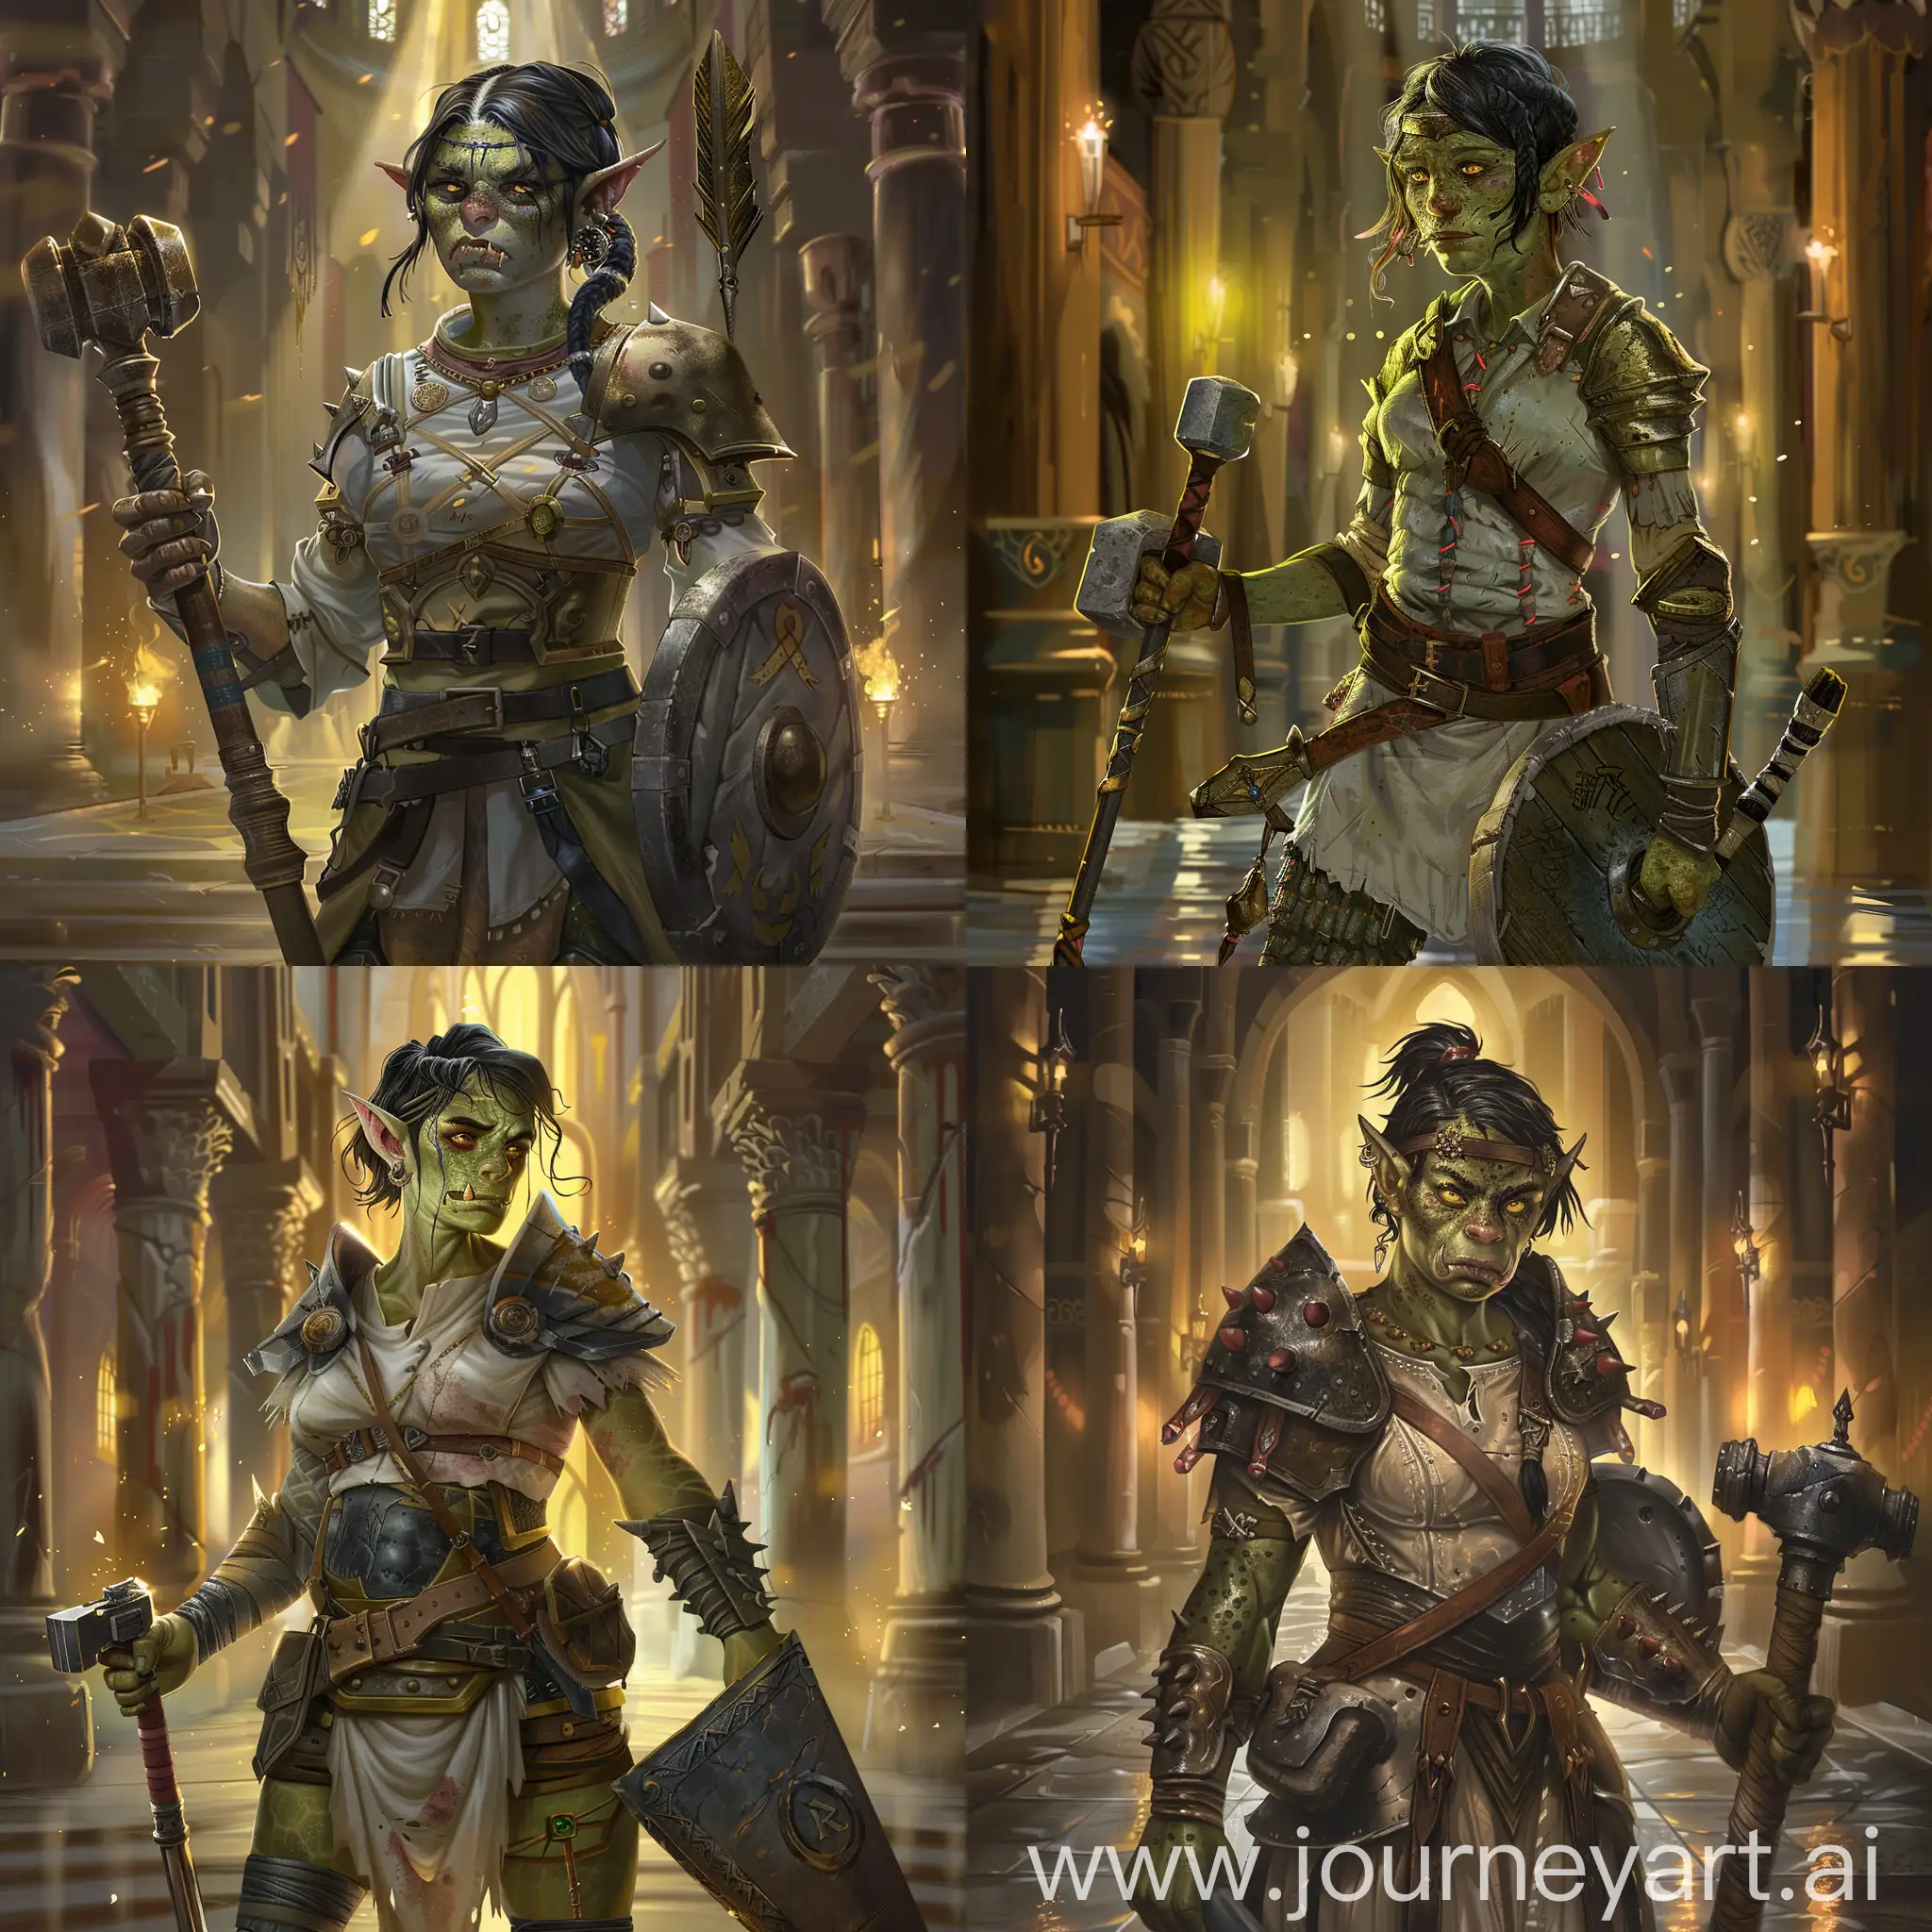 Female-Orc-Warrior-with-Mace-and-Shield-in-Magical-Medieval-Hall